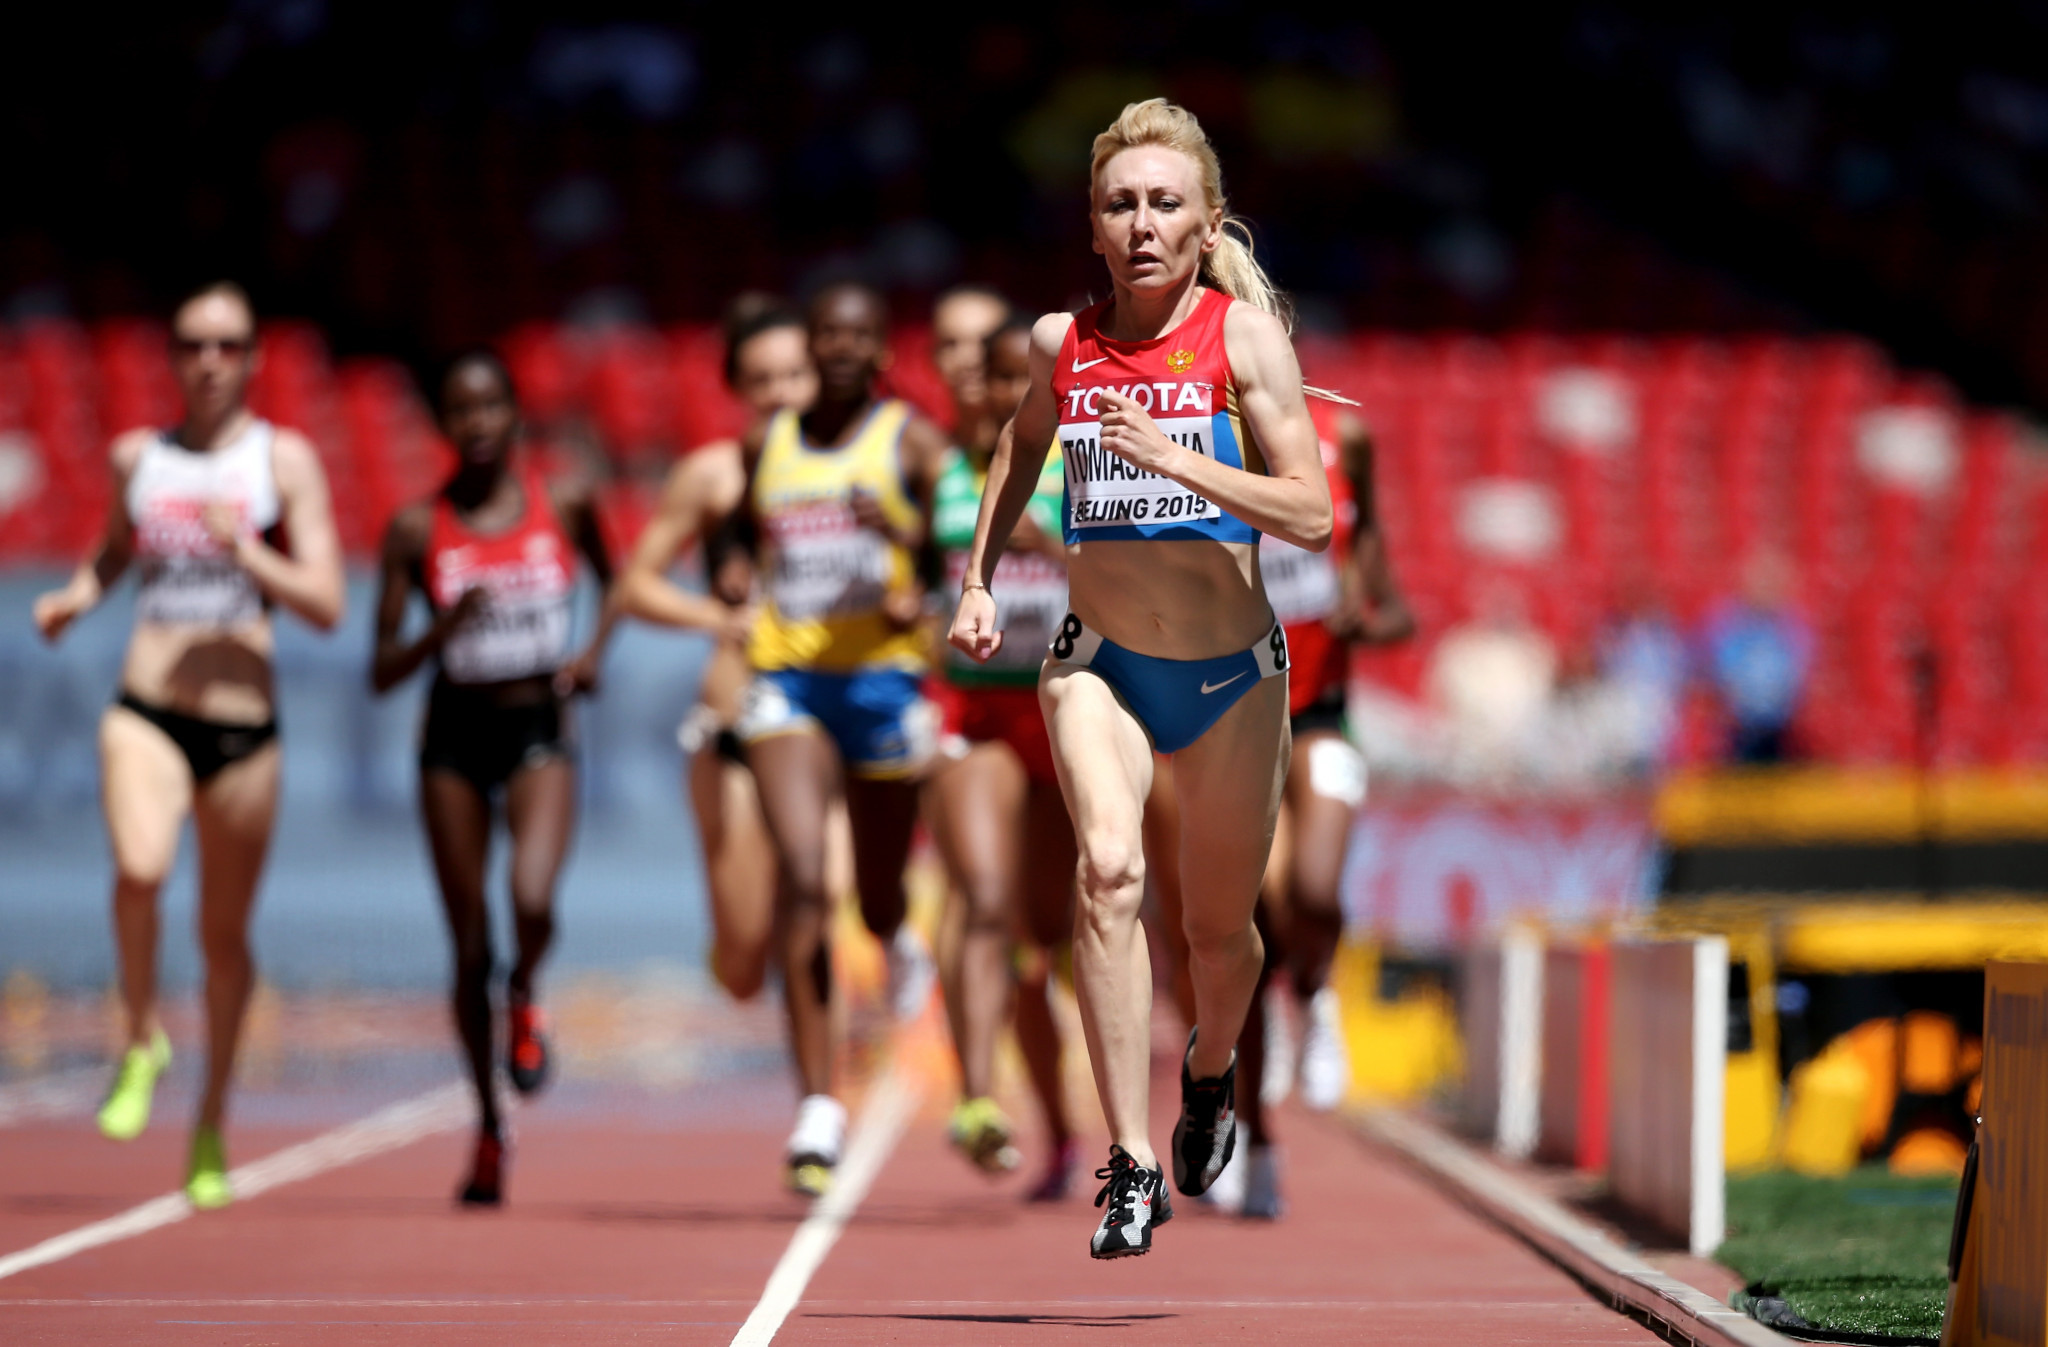 Tatyana Tomashova finished fourth in the 1,500m at London 2012 in a race considered among the dirtiest in history ©Getty Images